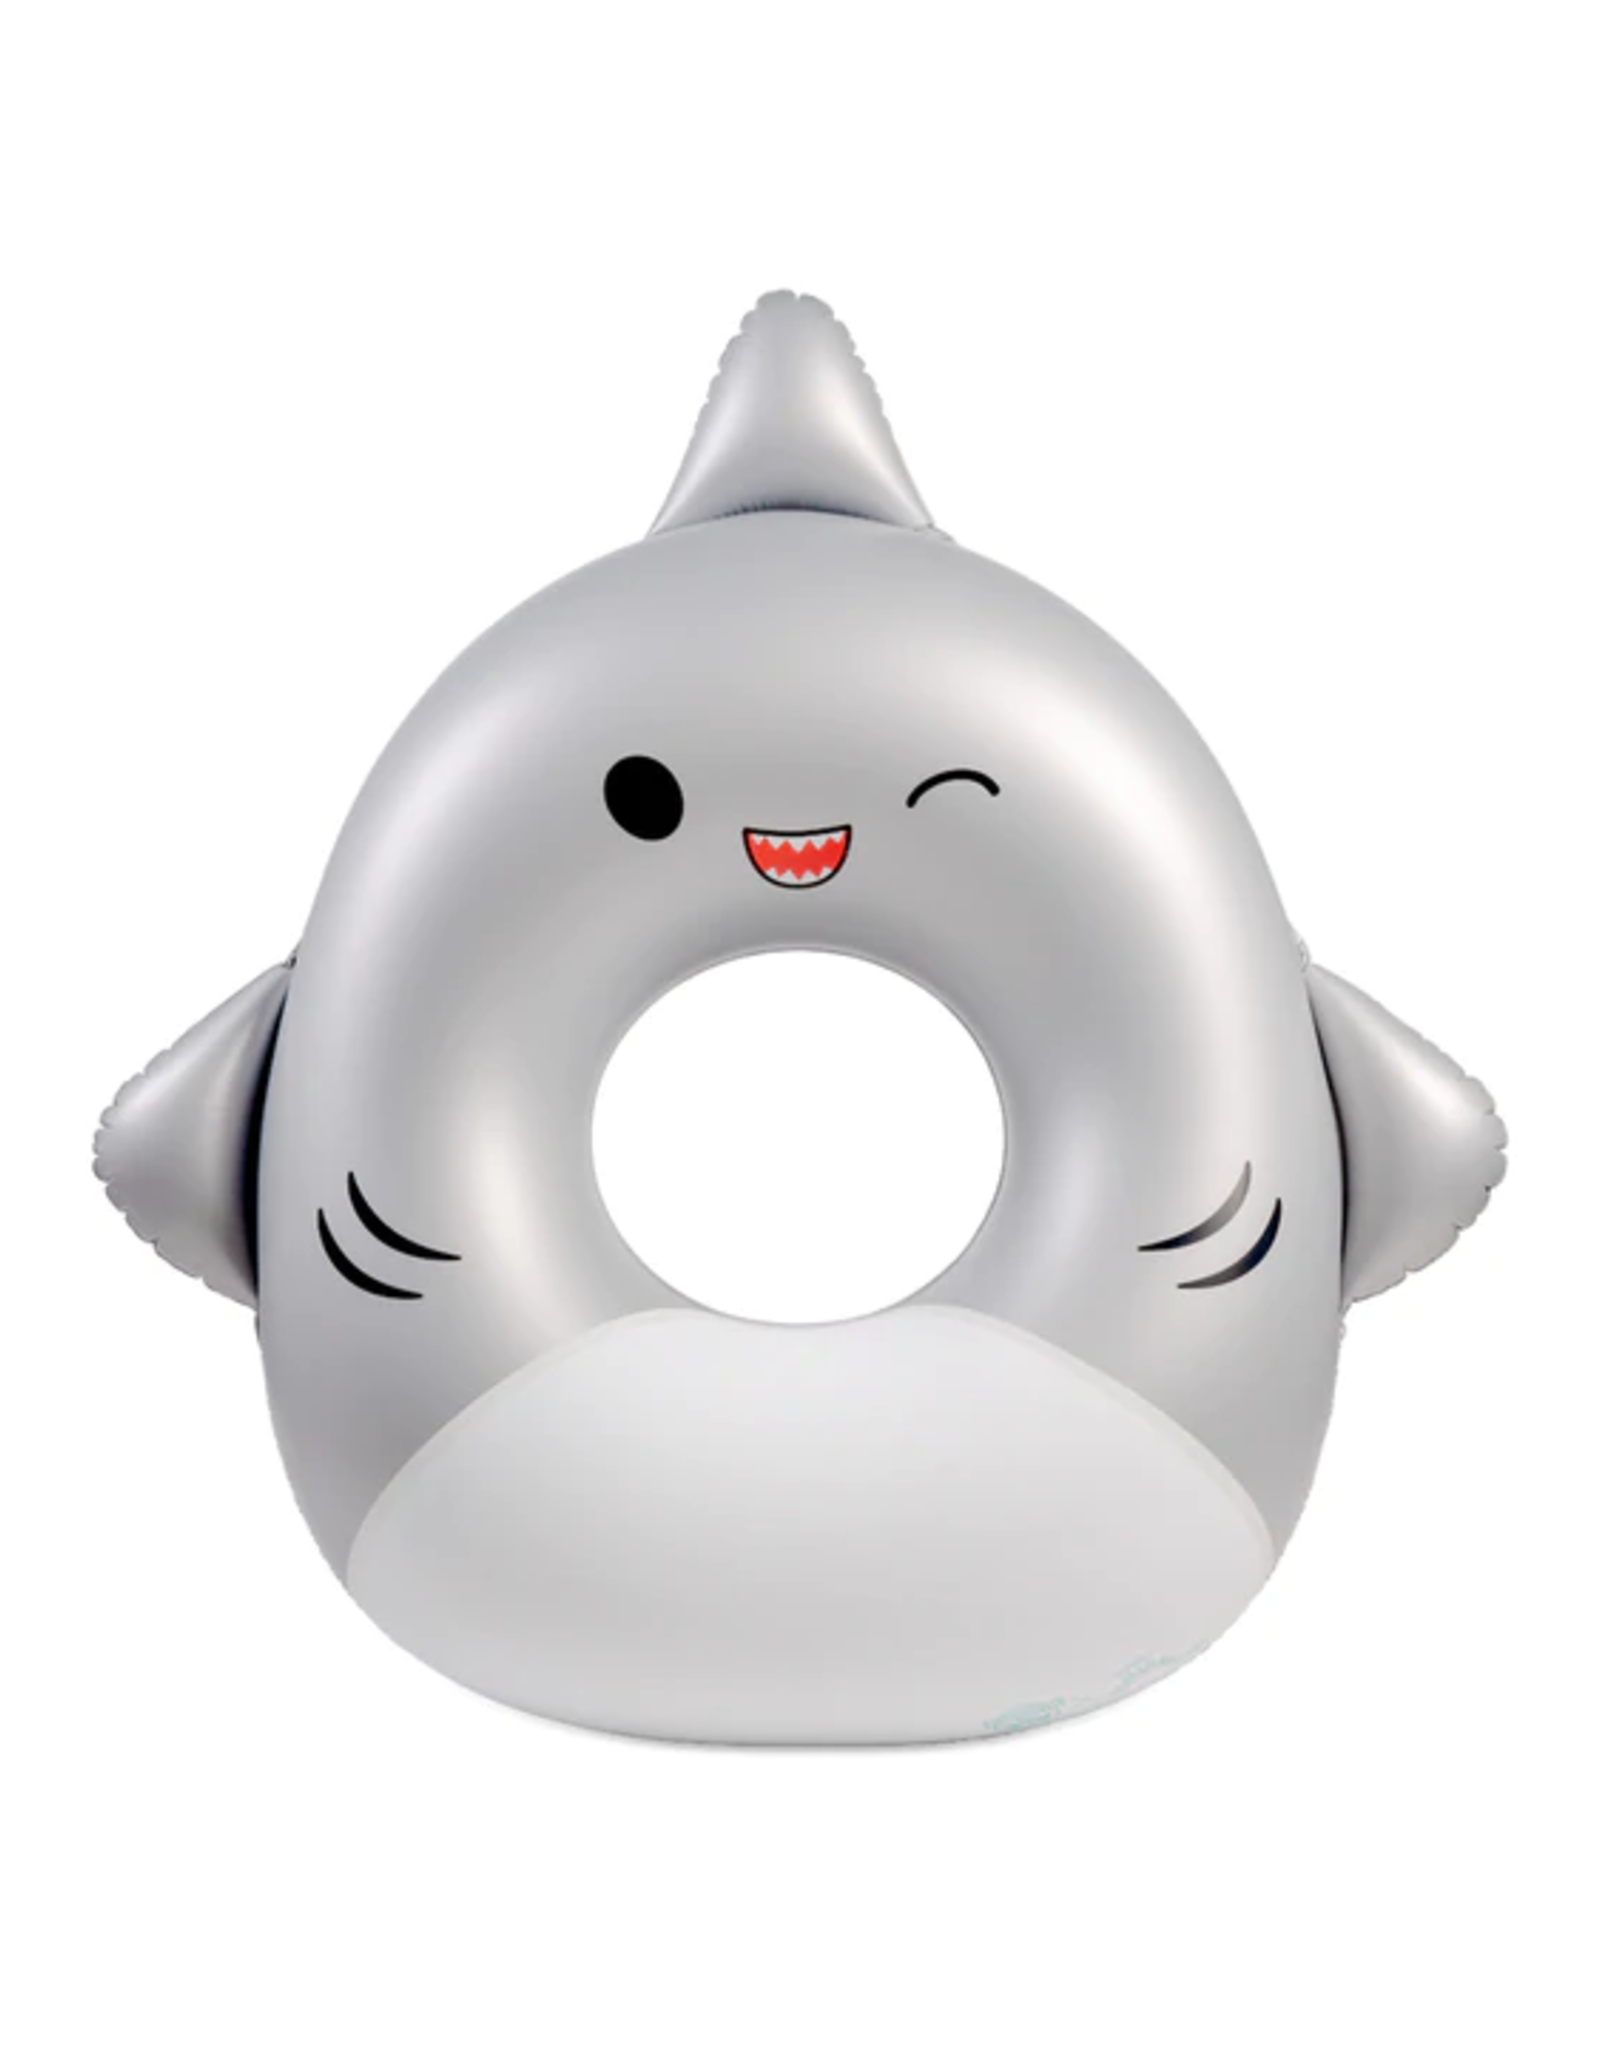 Big Mouth Pool Float - Squishmallow Shark